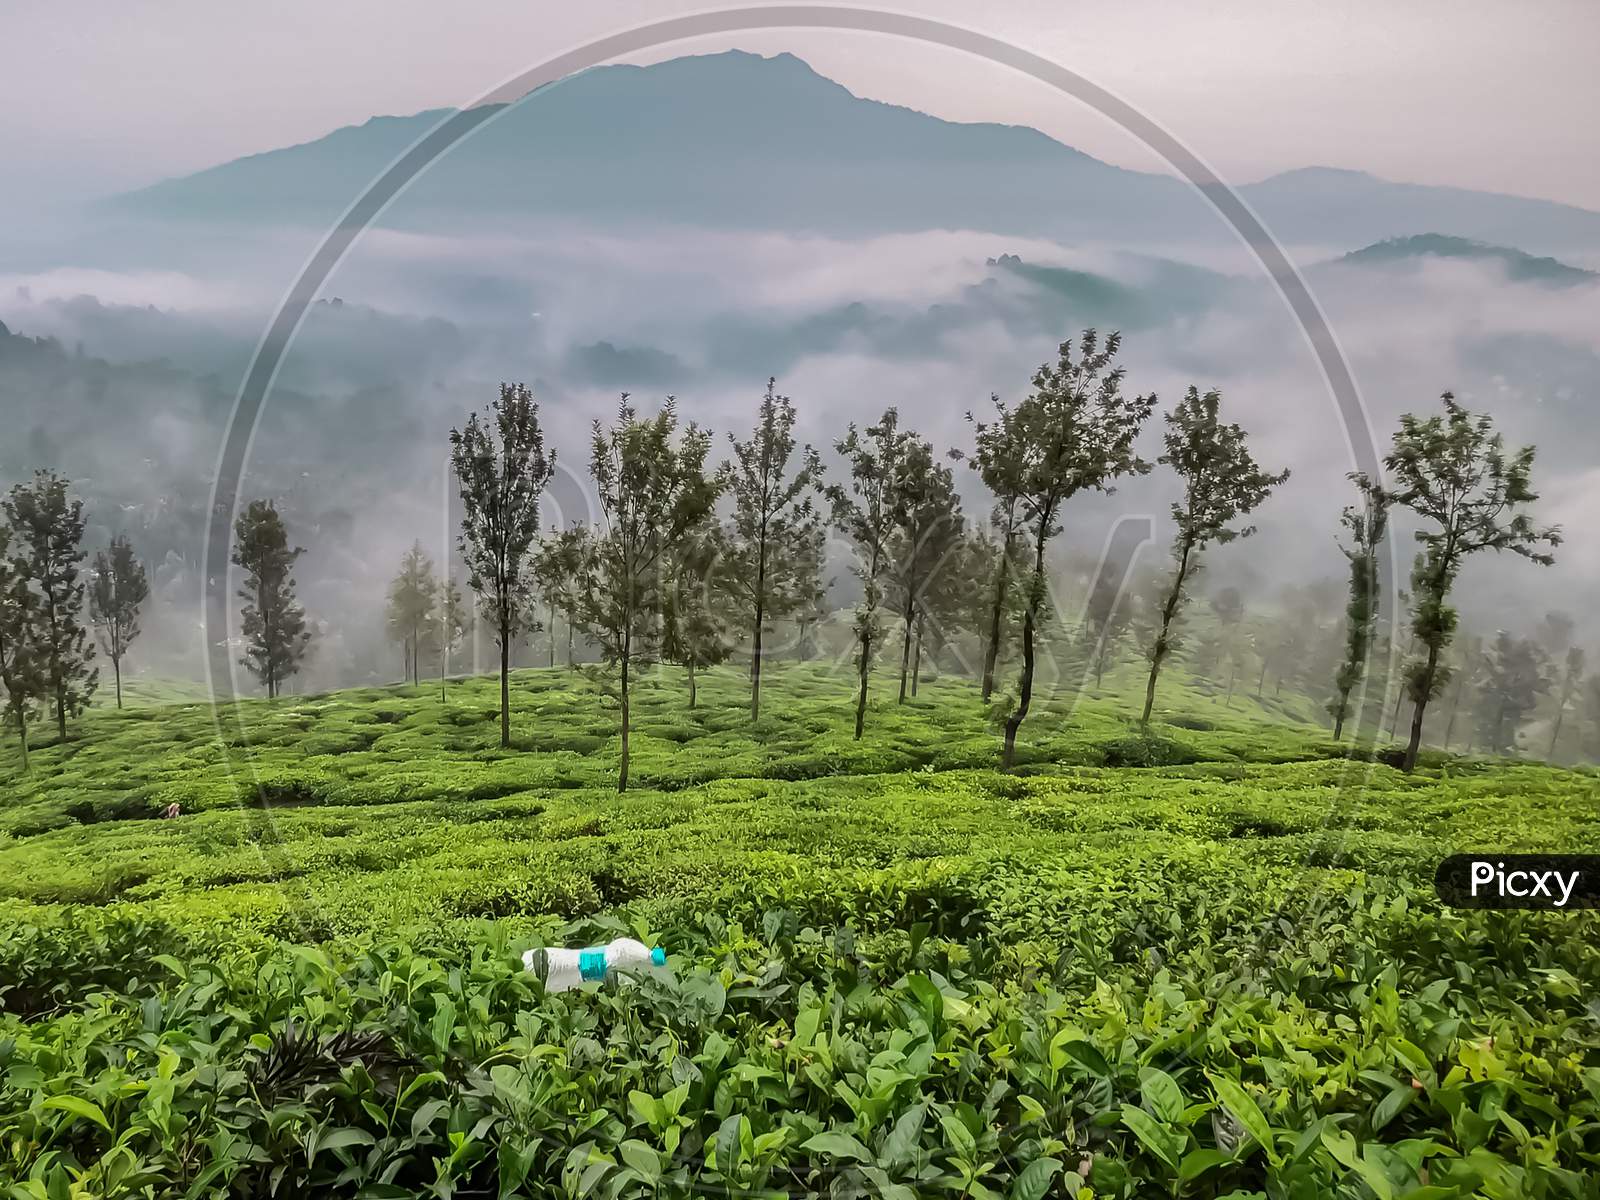 Landscape View Of A Plastic Bottle Spoiling And Polluting A Beautiful Site Of A Valley Of Tea Plantation And A Mountain In The Background.